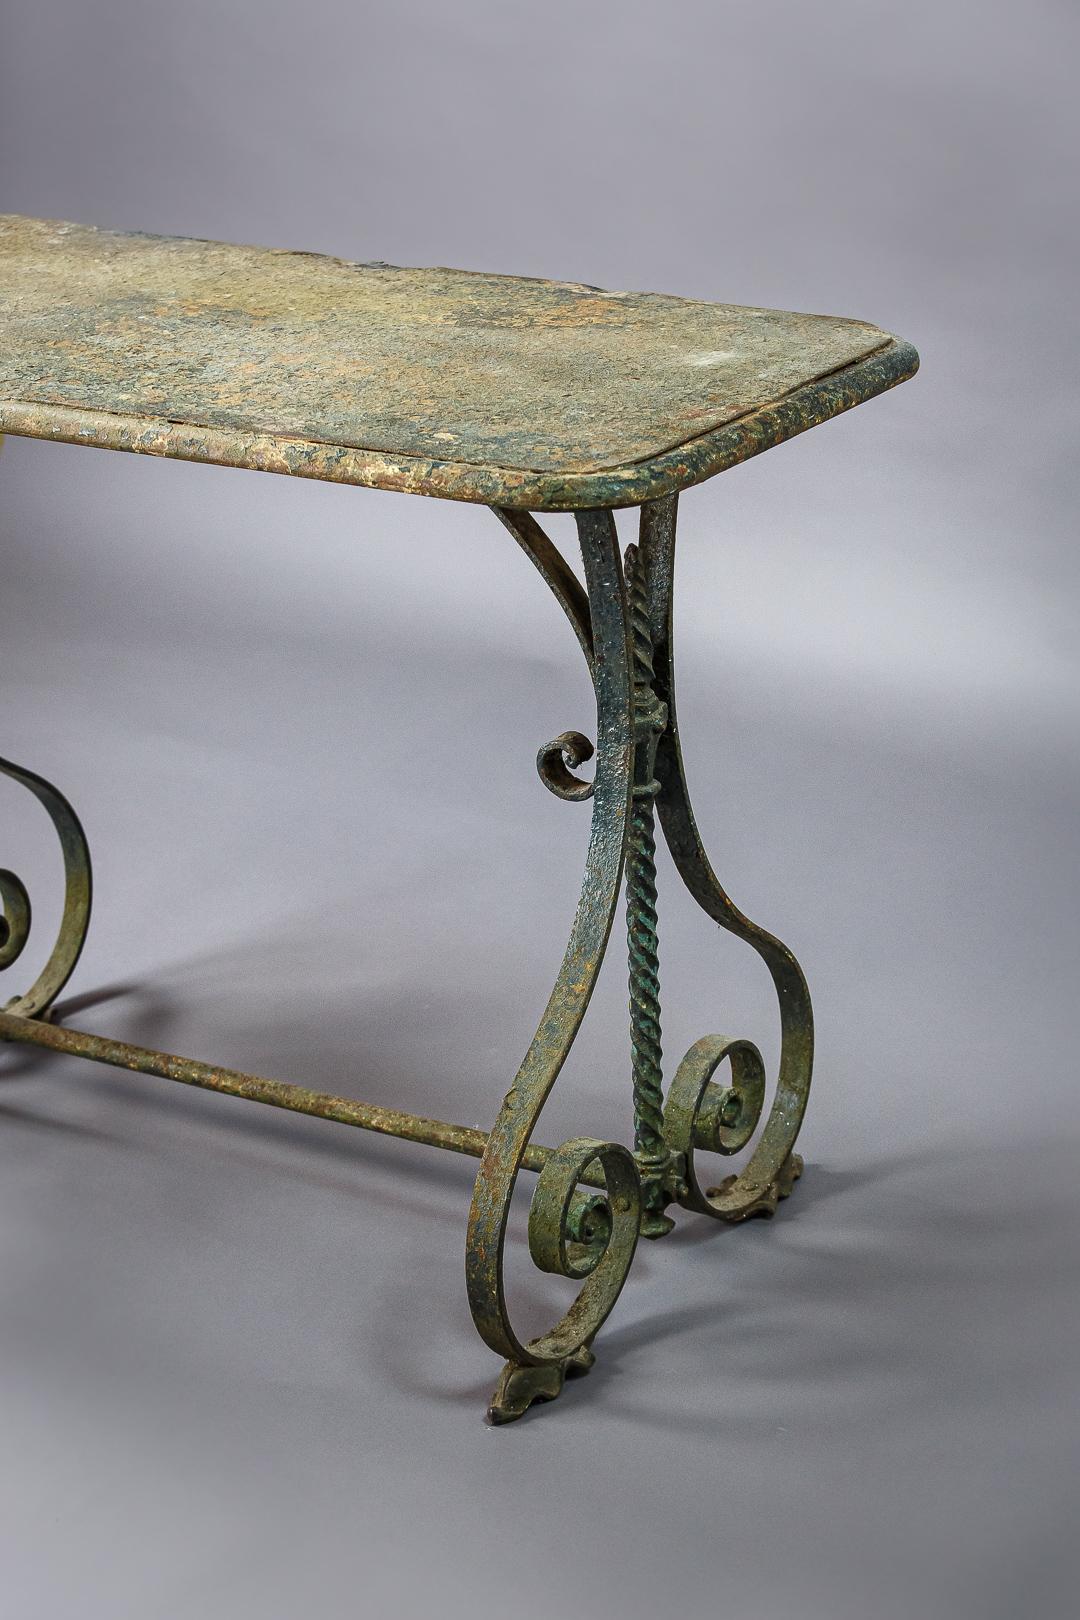 Early 20th Century Iron Garden Table In Fair Condition In Pease pottage, West Sussex